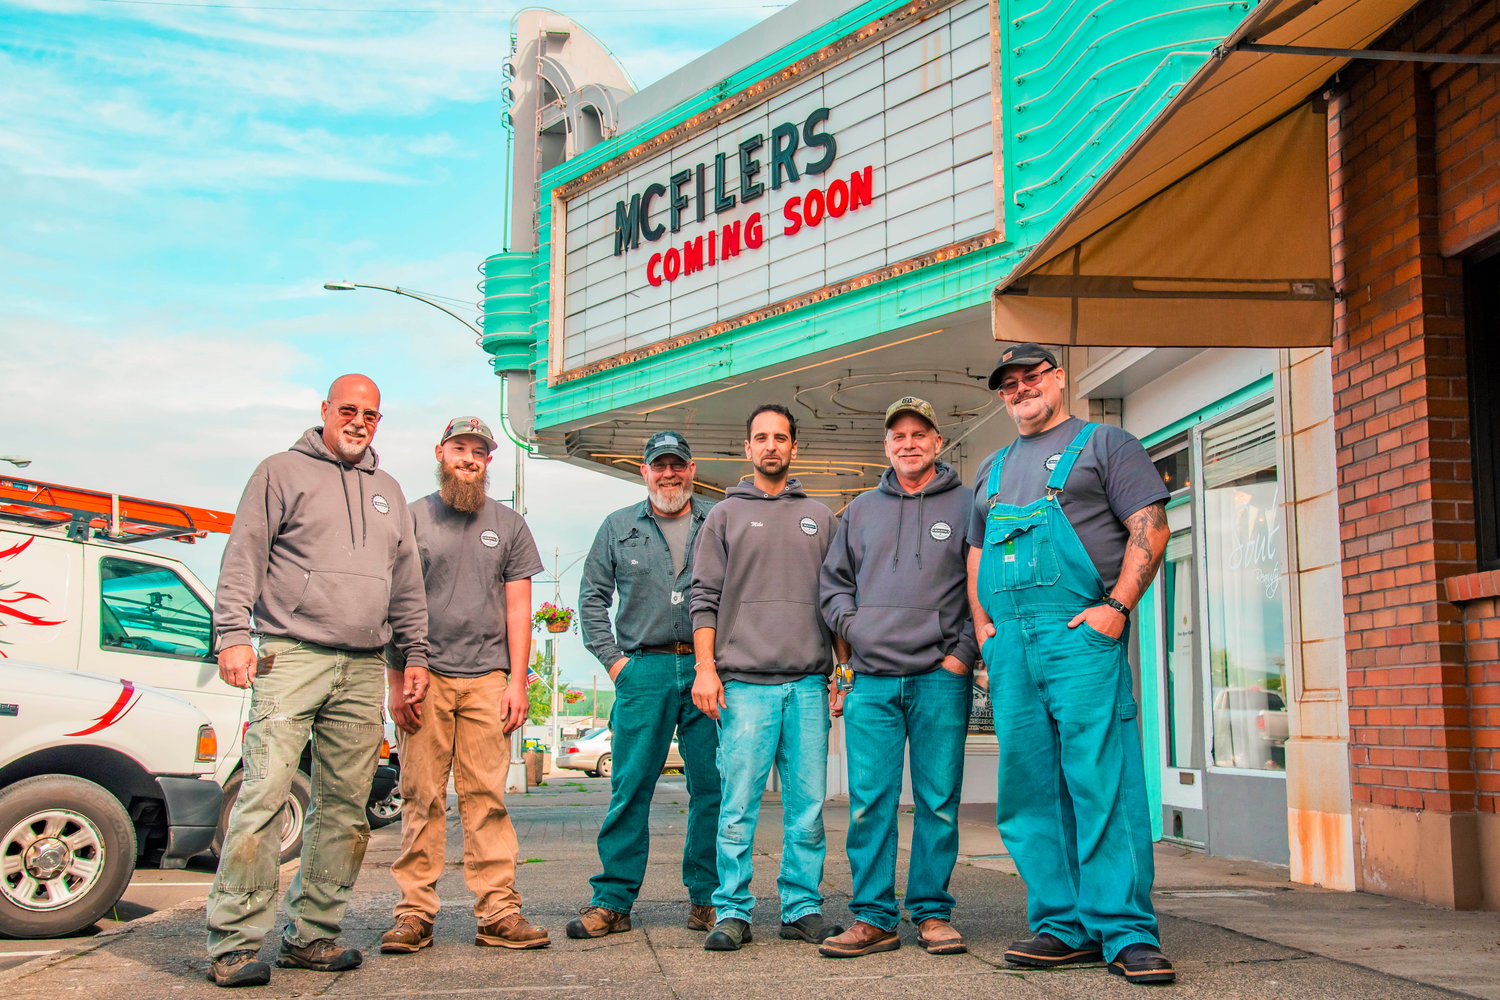 From left, Ron Winkleblack, Brenton Keefer, Rex Farrar, Mike DeMeo, Rick Johnson, and Paul Parker of Affordable Building and Maintenance Inc. smile and pose for photo outside the Chehalis Theater on Tuesday.